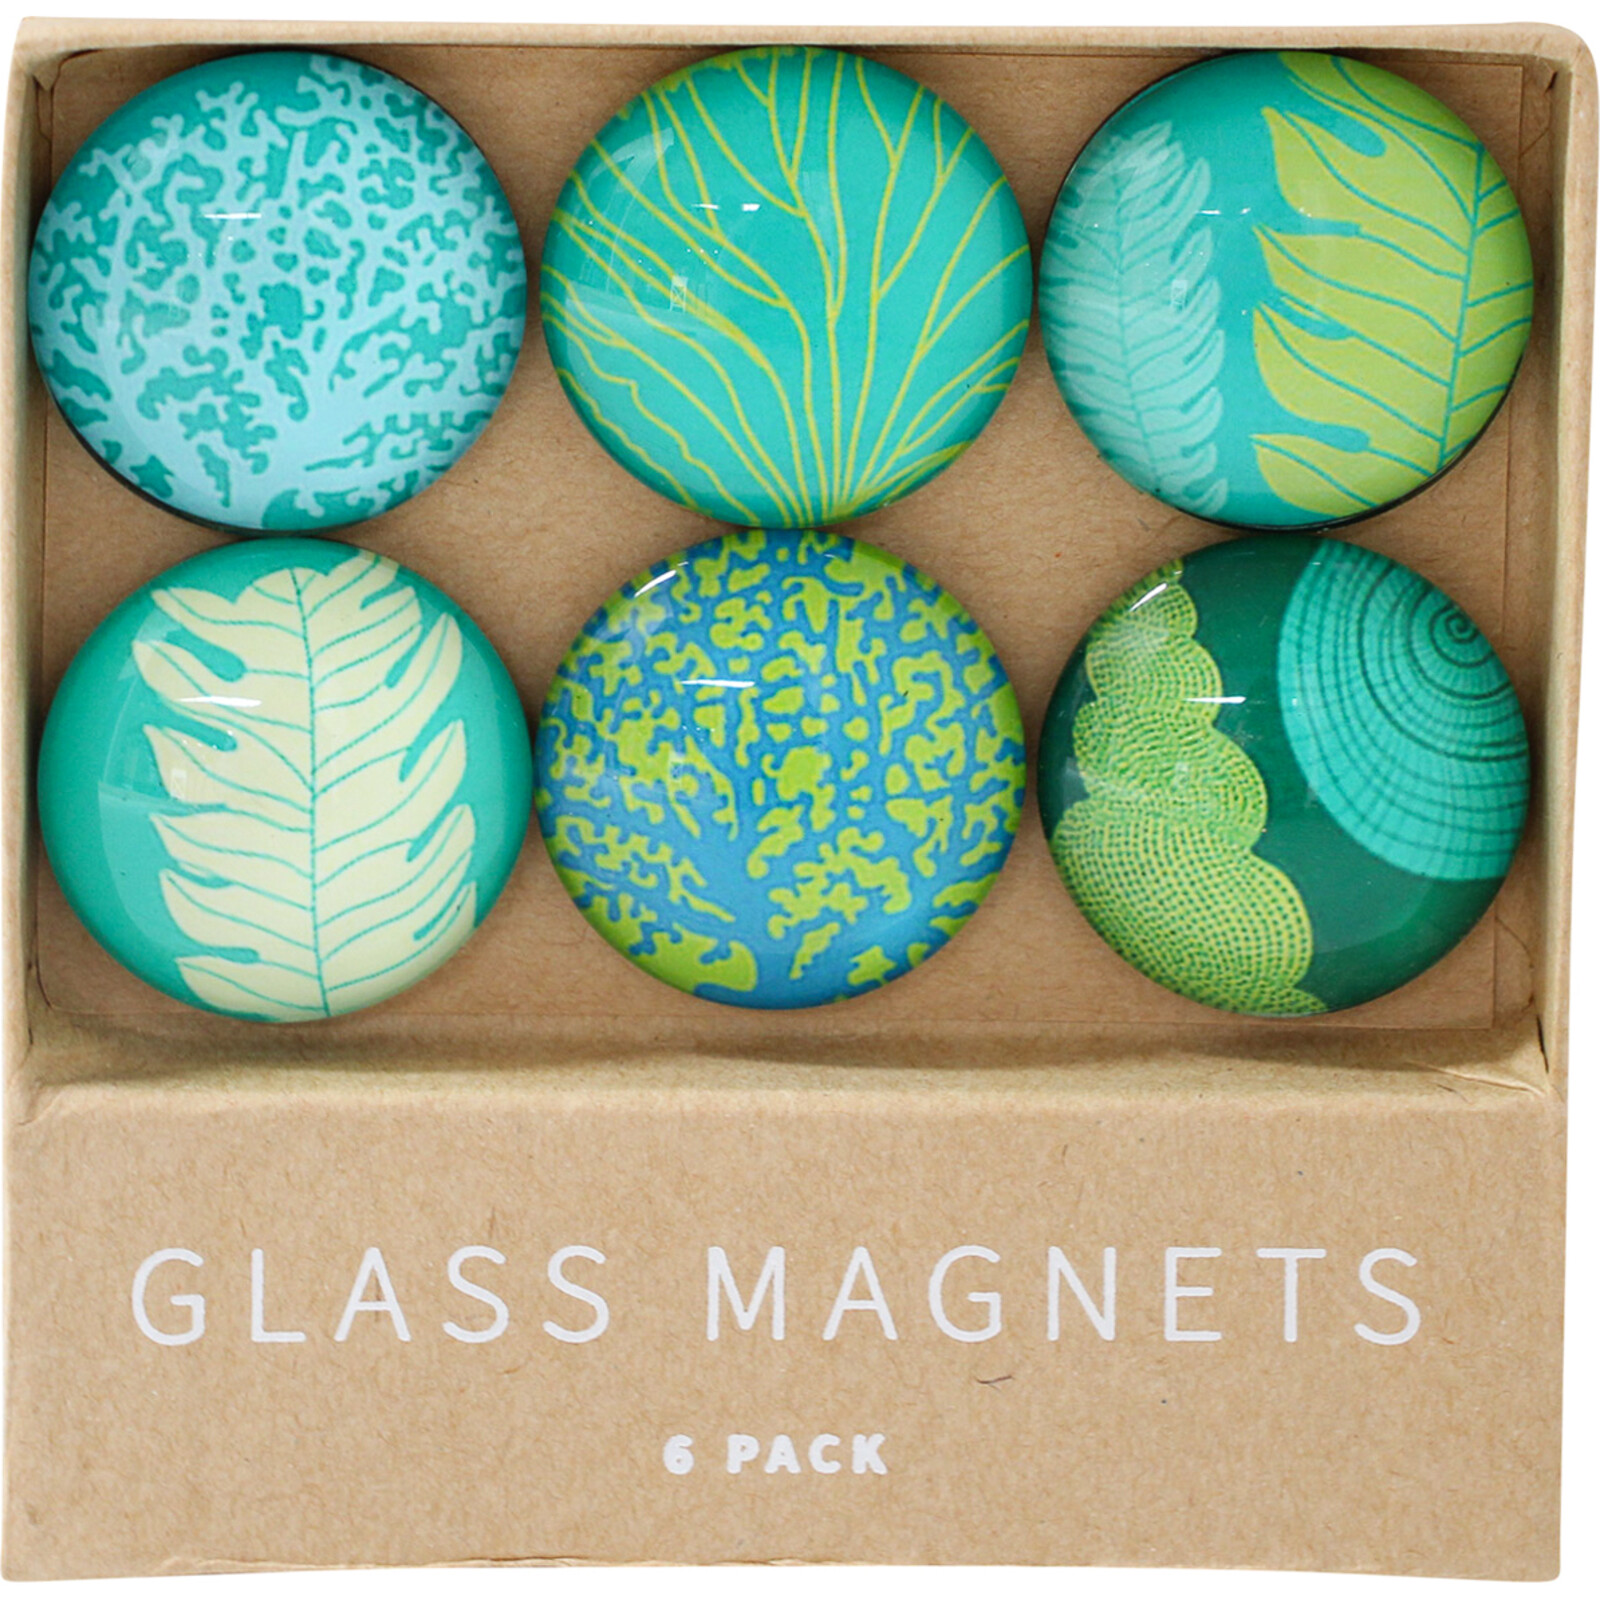 Glass Magnets Coral Reef S/6